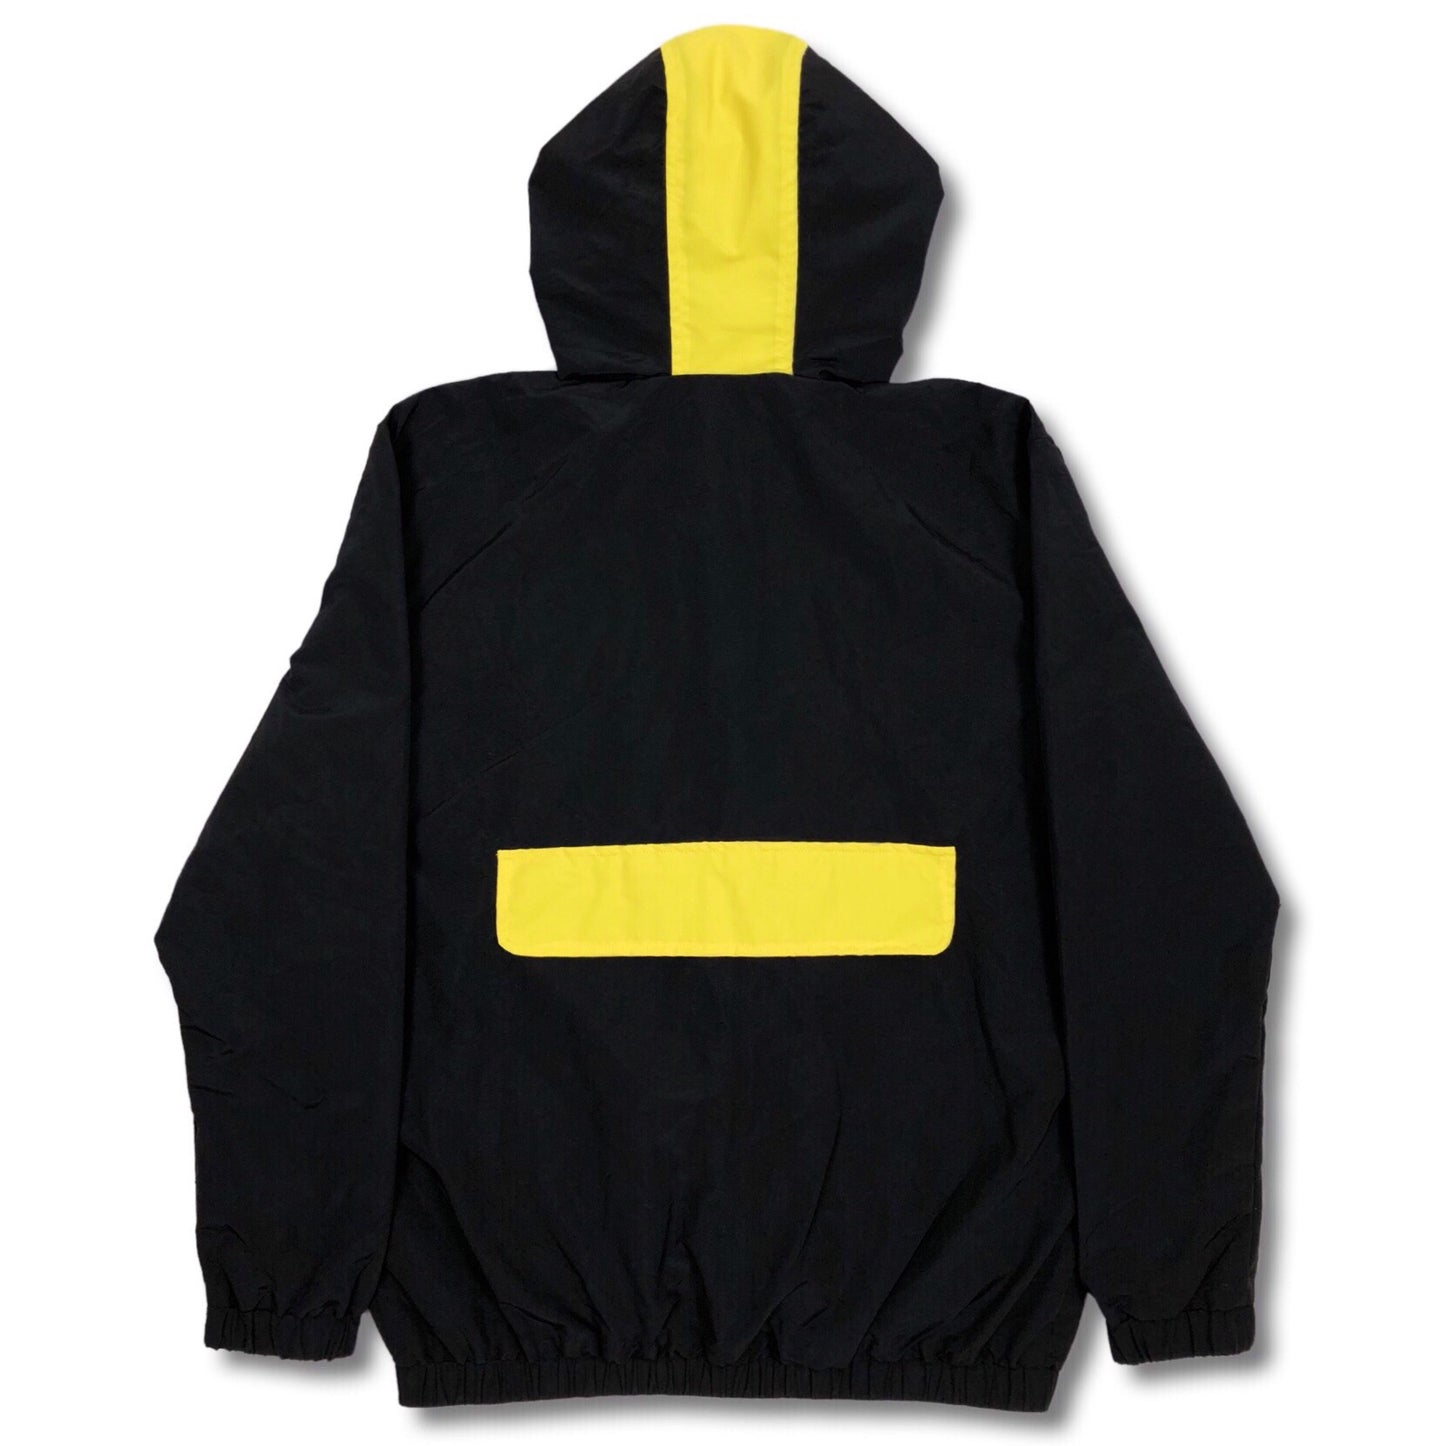 Stealth Hooded Tracksuit Jacket - Black/Yellow Bledwear Bled 